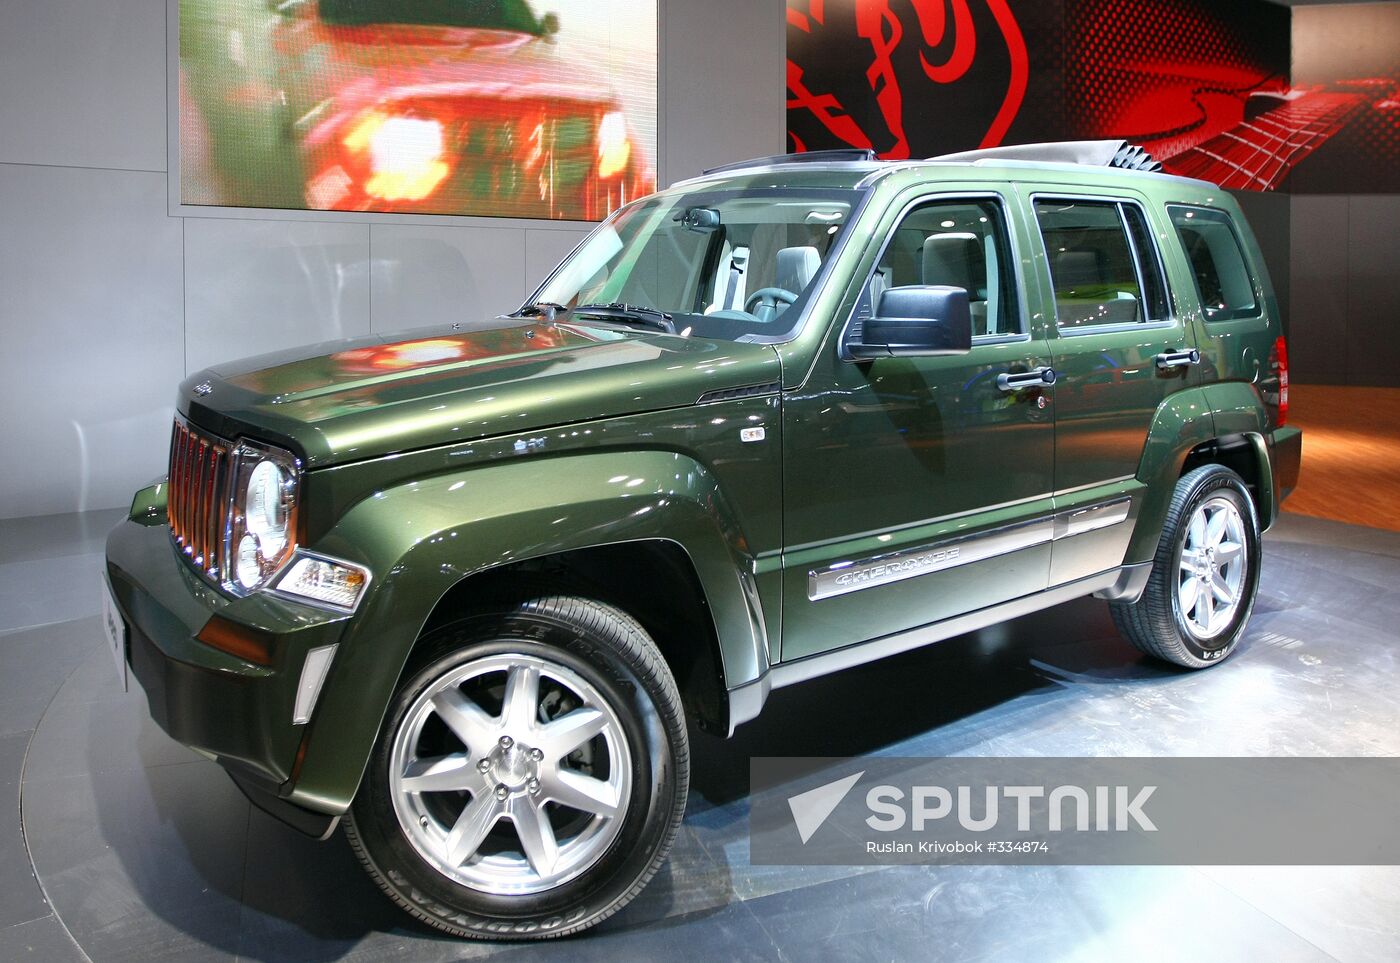 The Moscow International Auto Show has opened